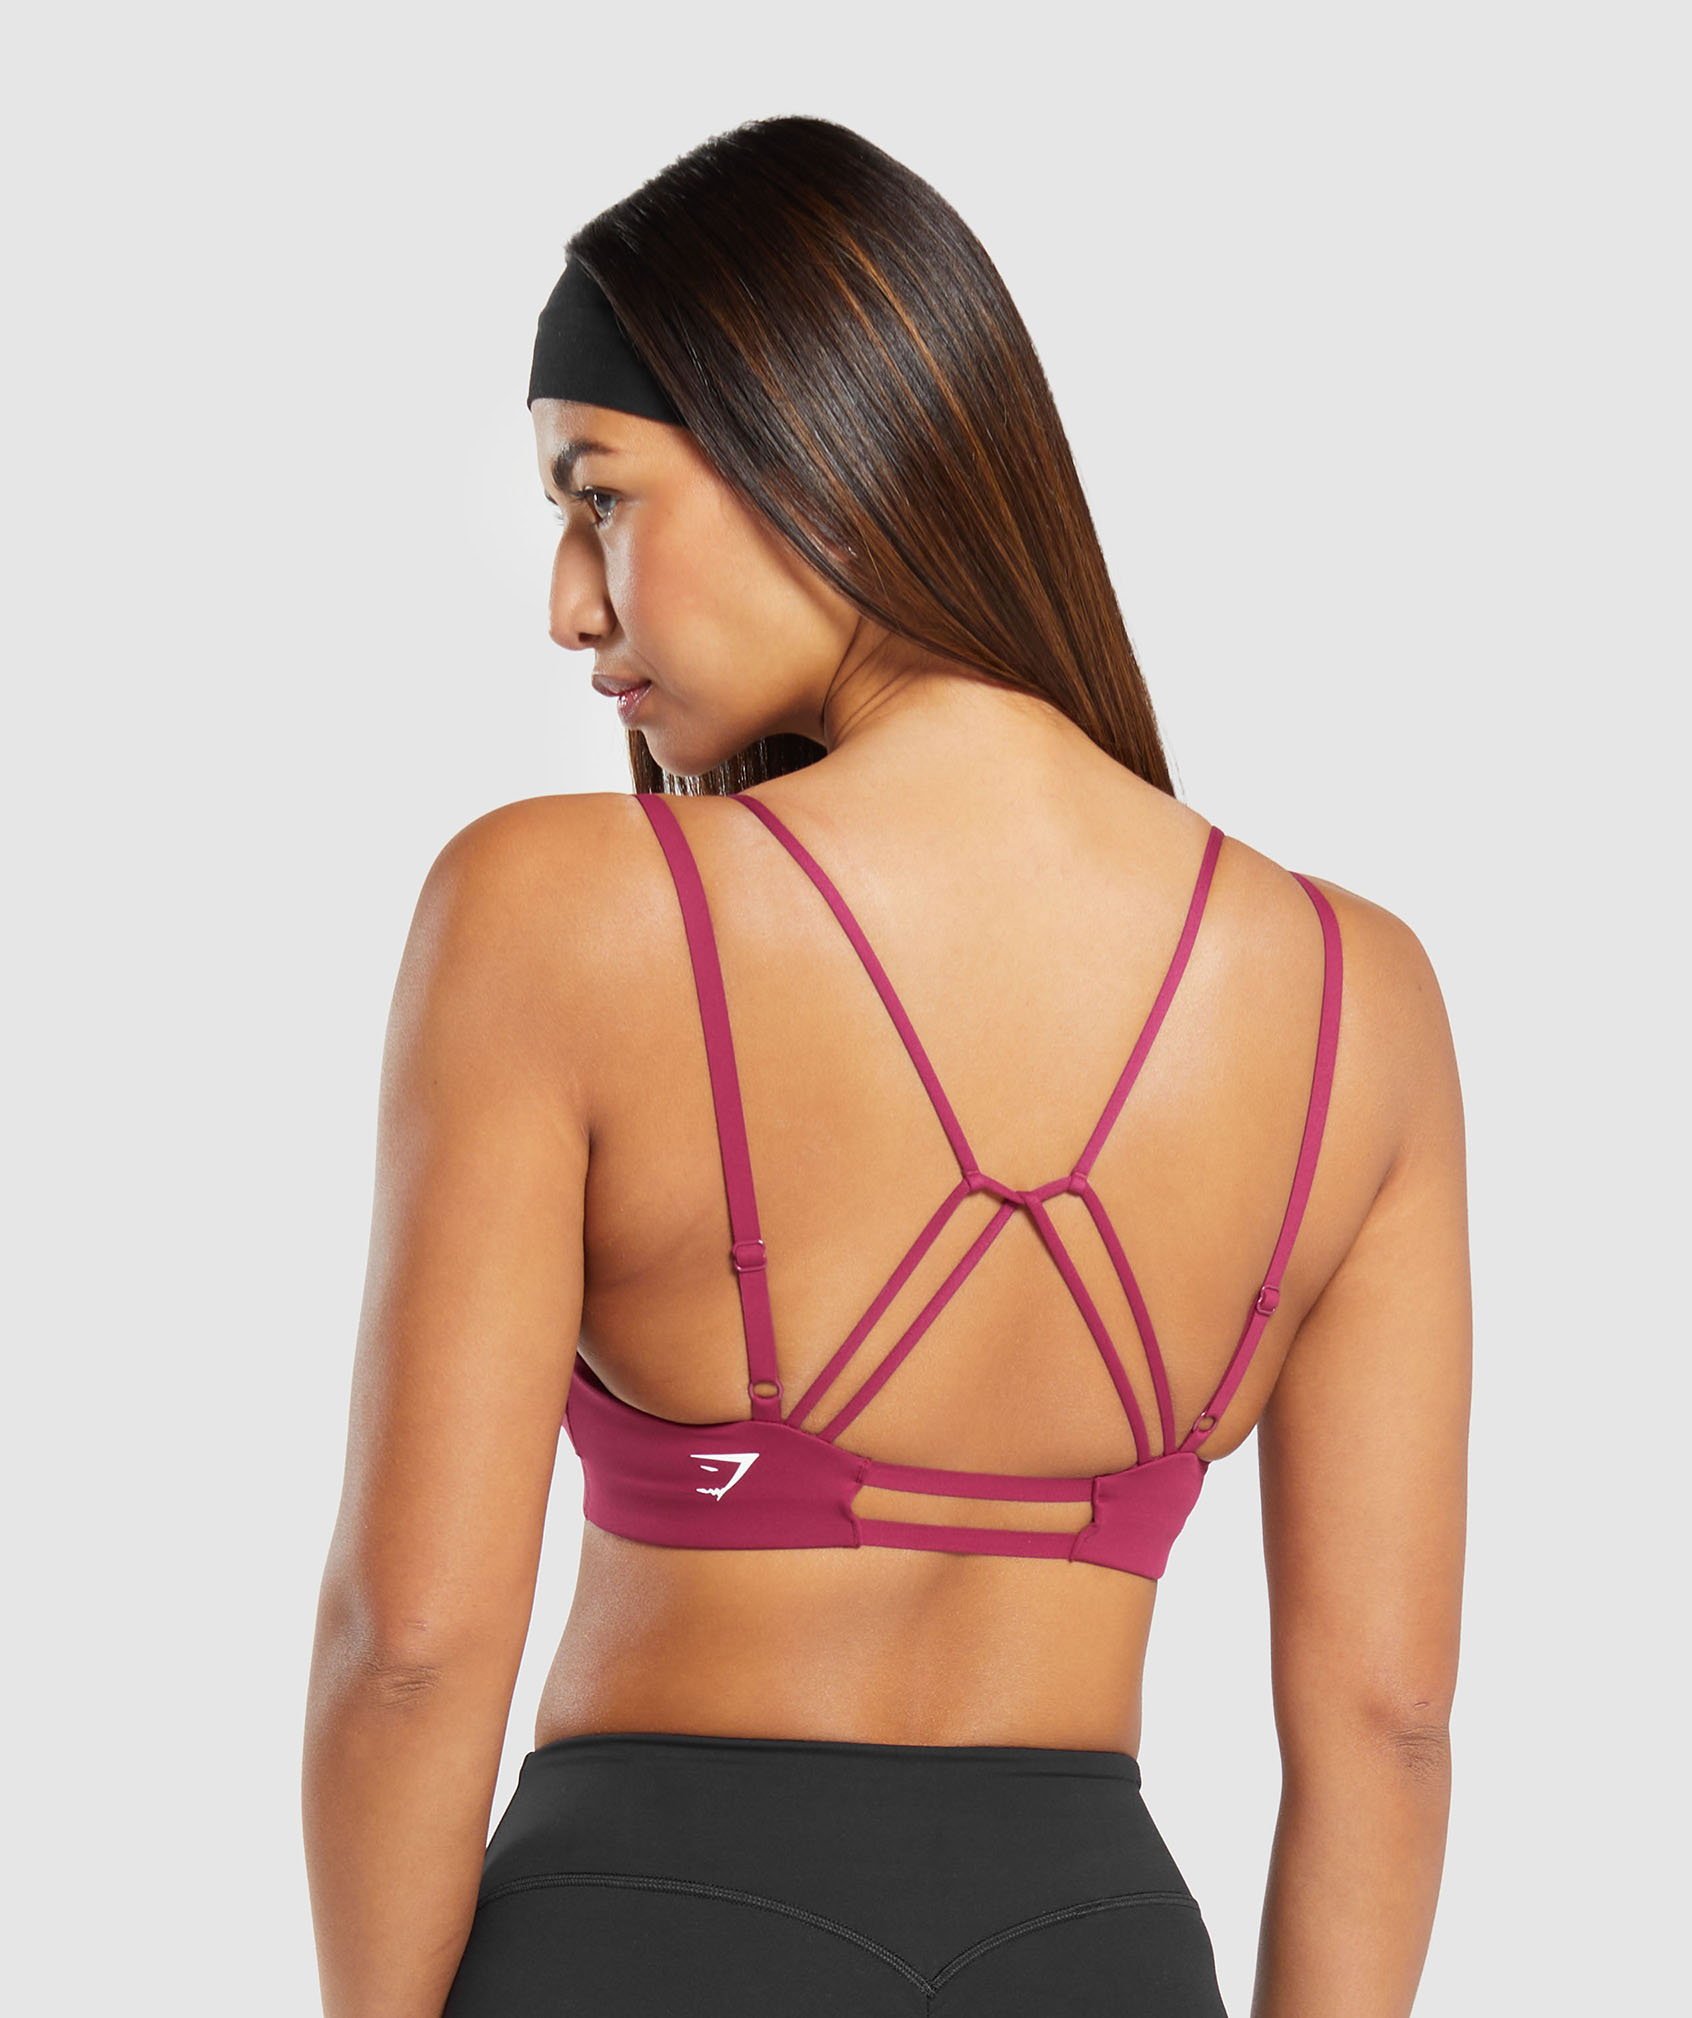 HRX Sports Bra, Yoga, aerobics, pilates or cardio – whatever your workout  style may be, we know how to keep you comfortable and trendy! #KeepGoing  with our range of